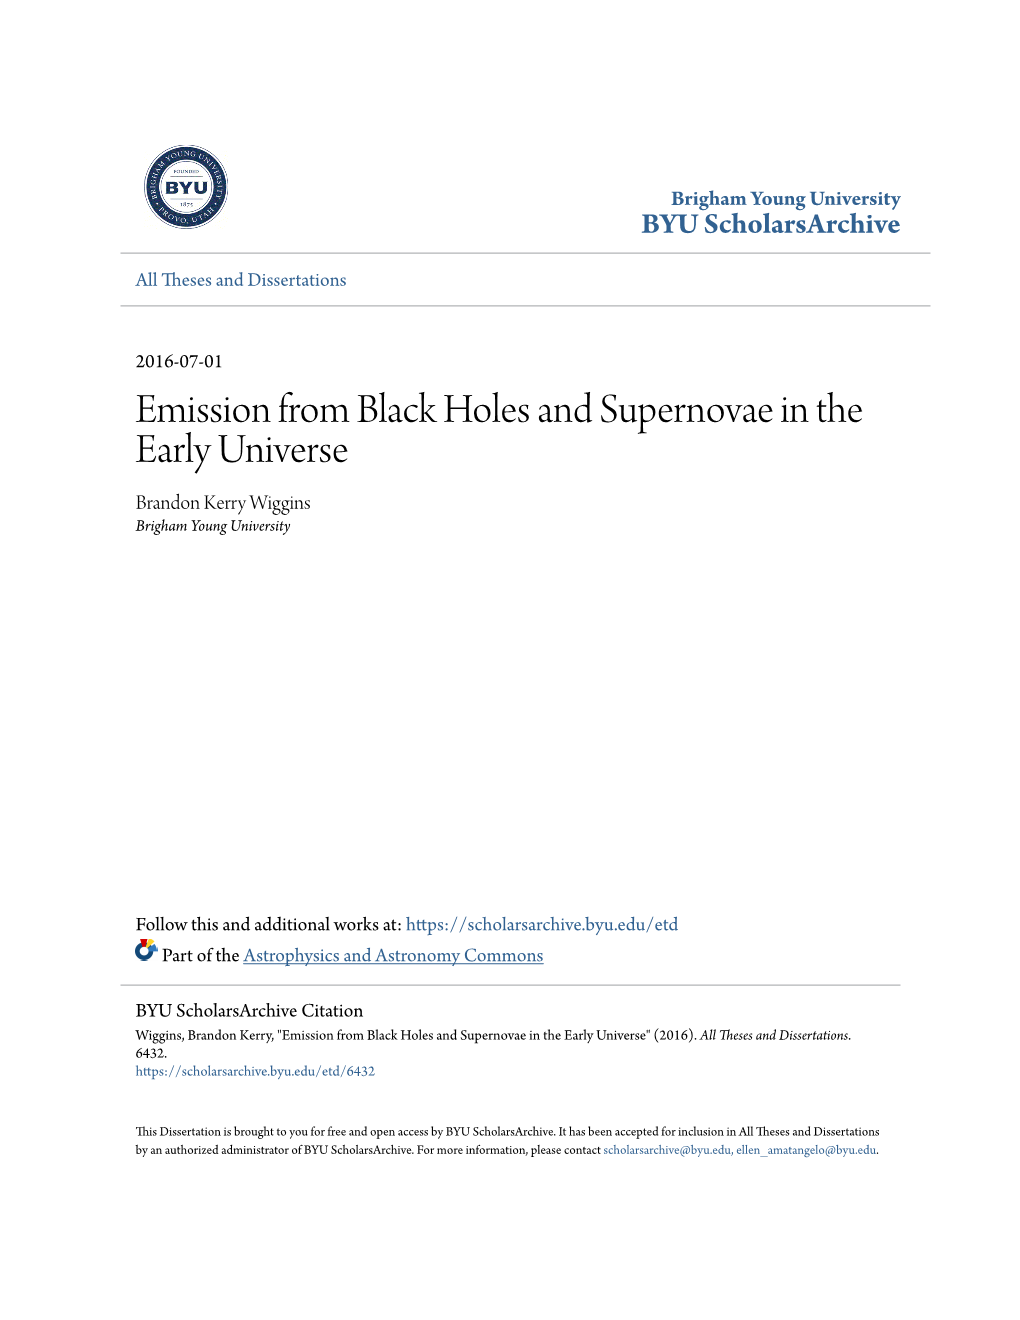 Emission from Black Holes and Supernovae in the Early Universe Brandon Kerry Wiggins Brigham Young University